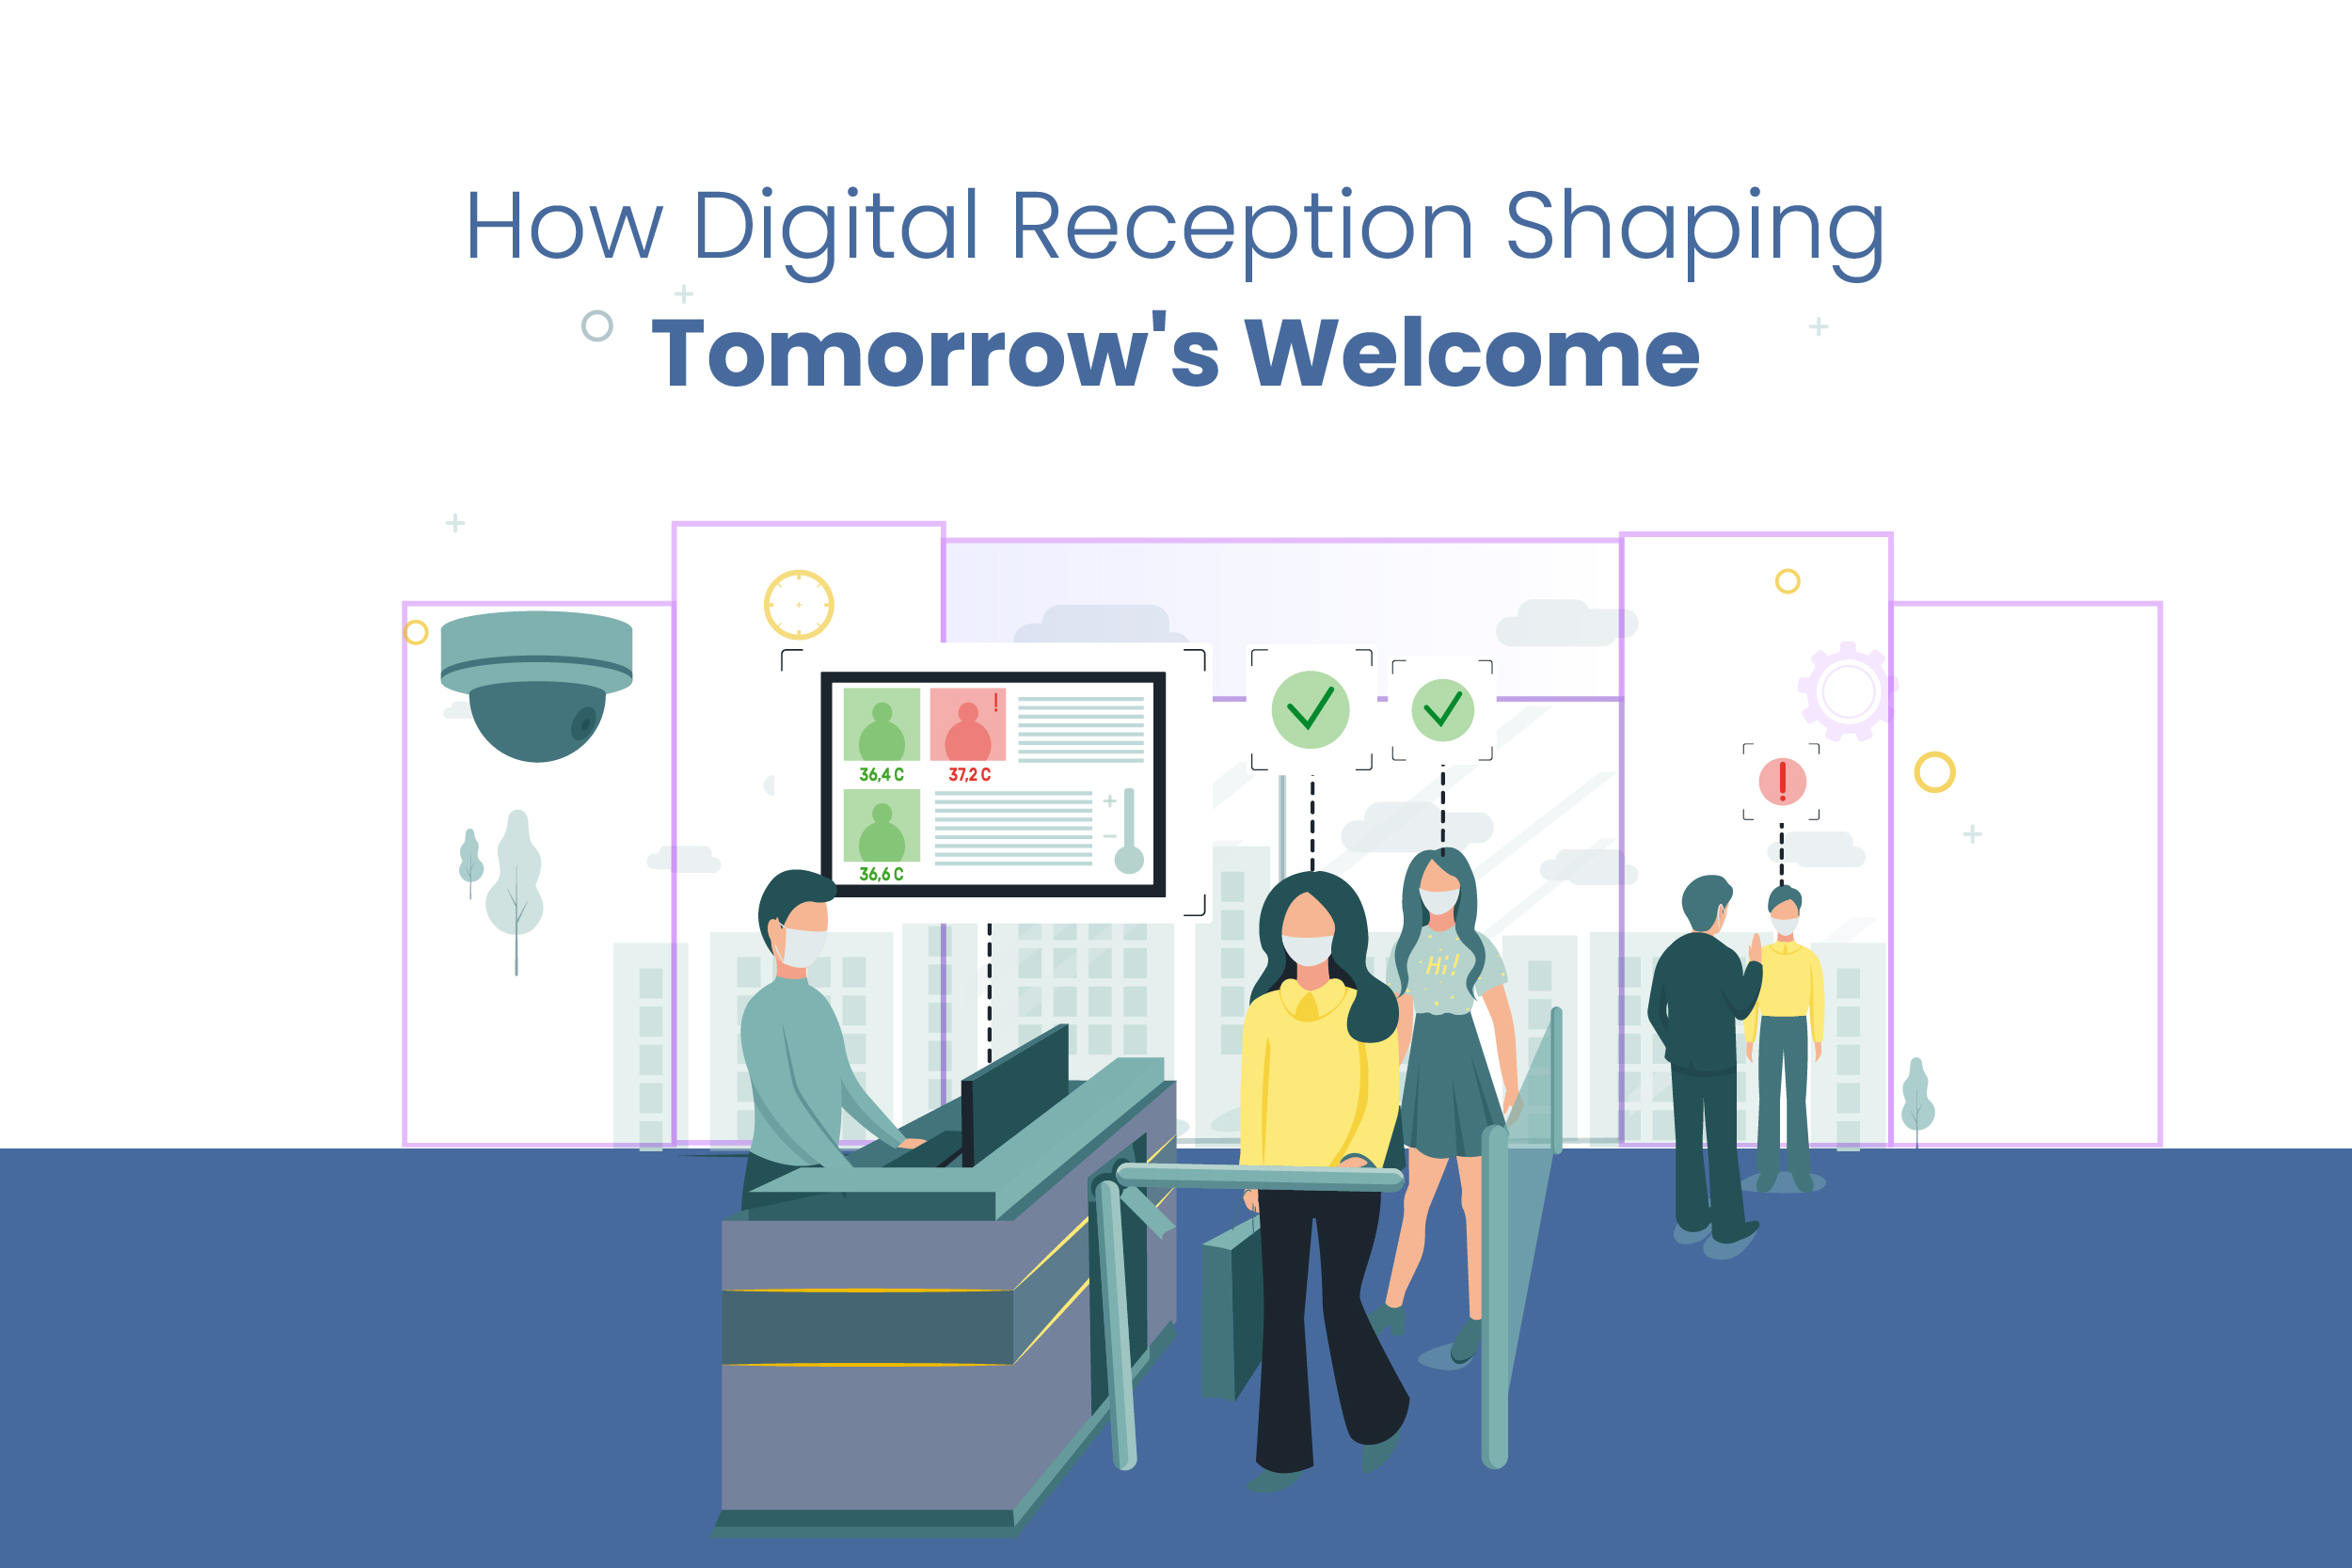 How Digital Reception Shaping Tomorrow's Welcome